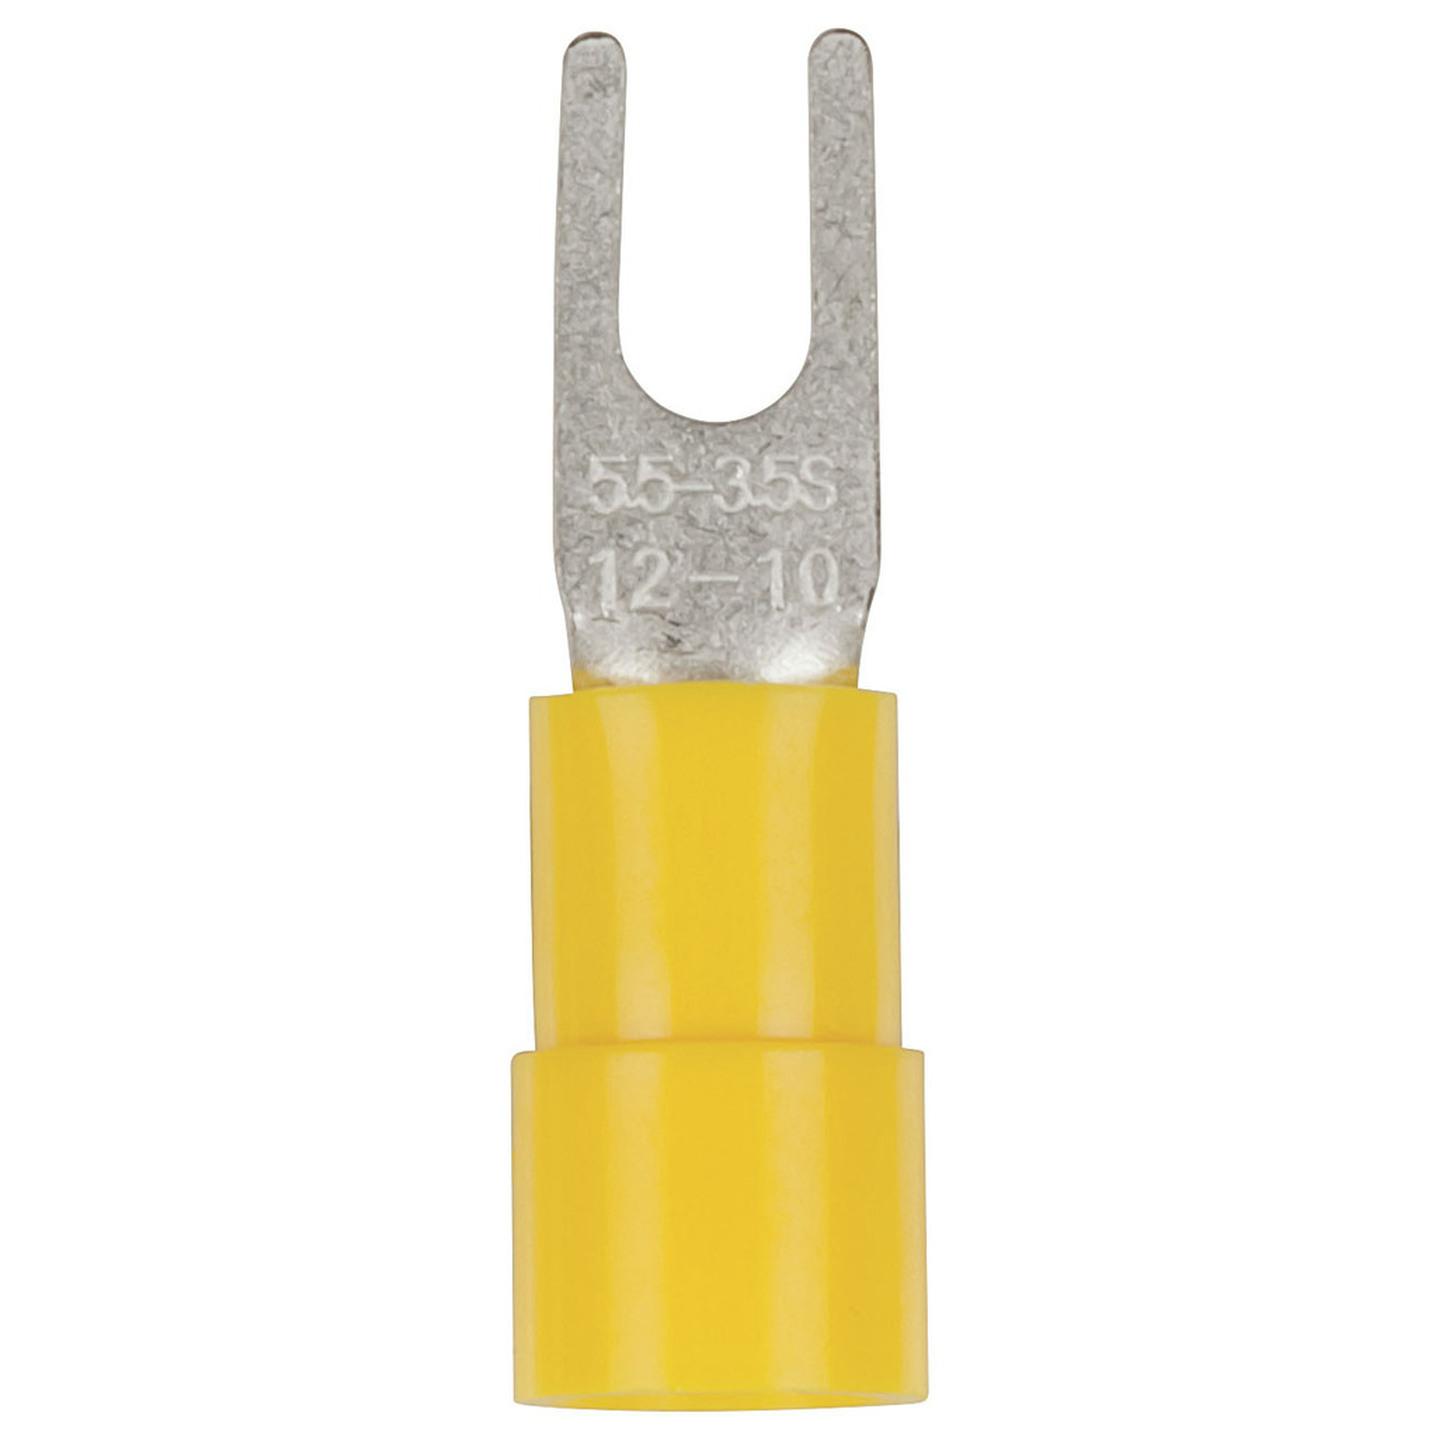 Forked Spade - Yellow - Pack of 8